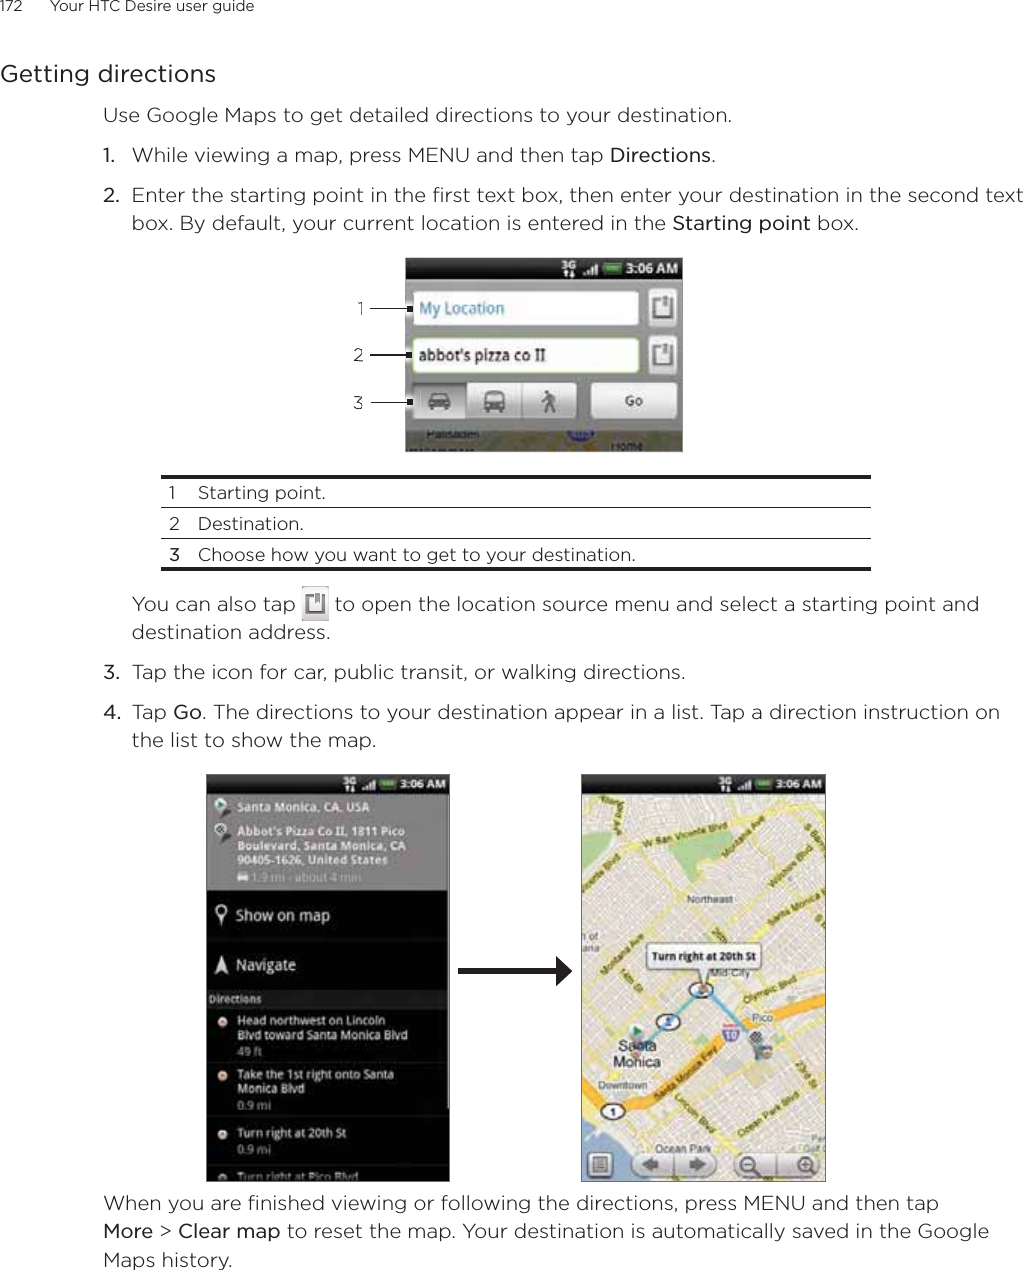 172      Your HTC Desire user guide      Getting directionsUse Google Maps to get detailed directions to your destination.While viewing a map, press MENU and then tap Directions.Enter the starting point in the first text box, then enter your destination in the second text box. By default, your current location is entered in the Starting point box.3121 Starting point. 2 Destination.3  Choose how you want to get to your destination.You can also tap   to open the location source menu and select a starting point and destination address.3. Tap the icon for car, public transit, or walking directions.4. Tap Go. The directions to your destination appear in a list. Tap a direction instruction on the list to show the map. When you are finished viewing or following the directions, press MENU and then tap More &gt; Clear map to reset the map. Your destination is automatically saved in the Google Maps history.1.2.